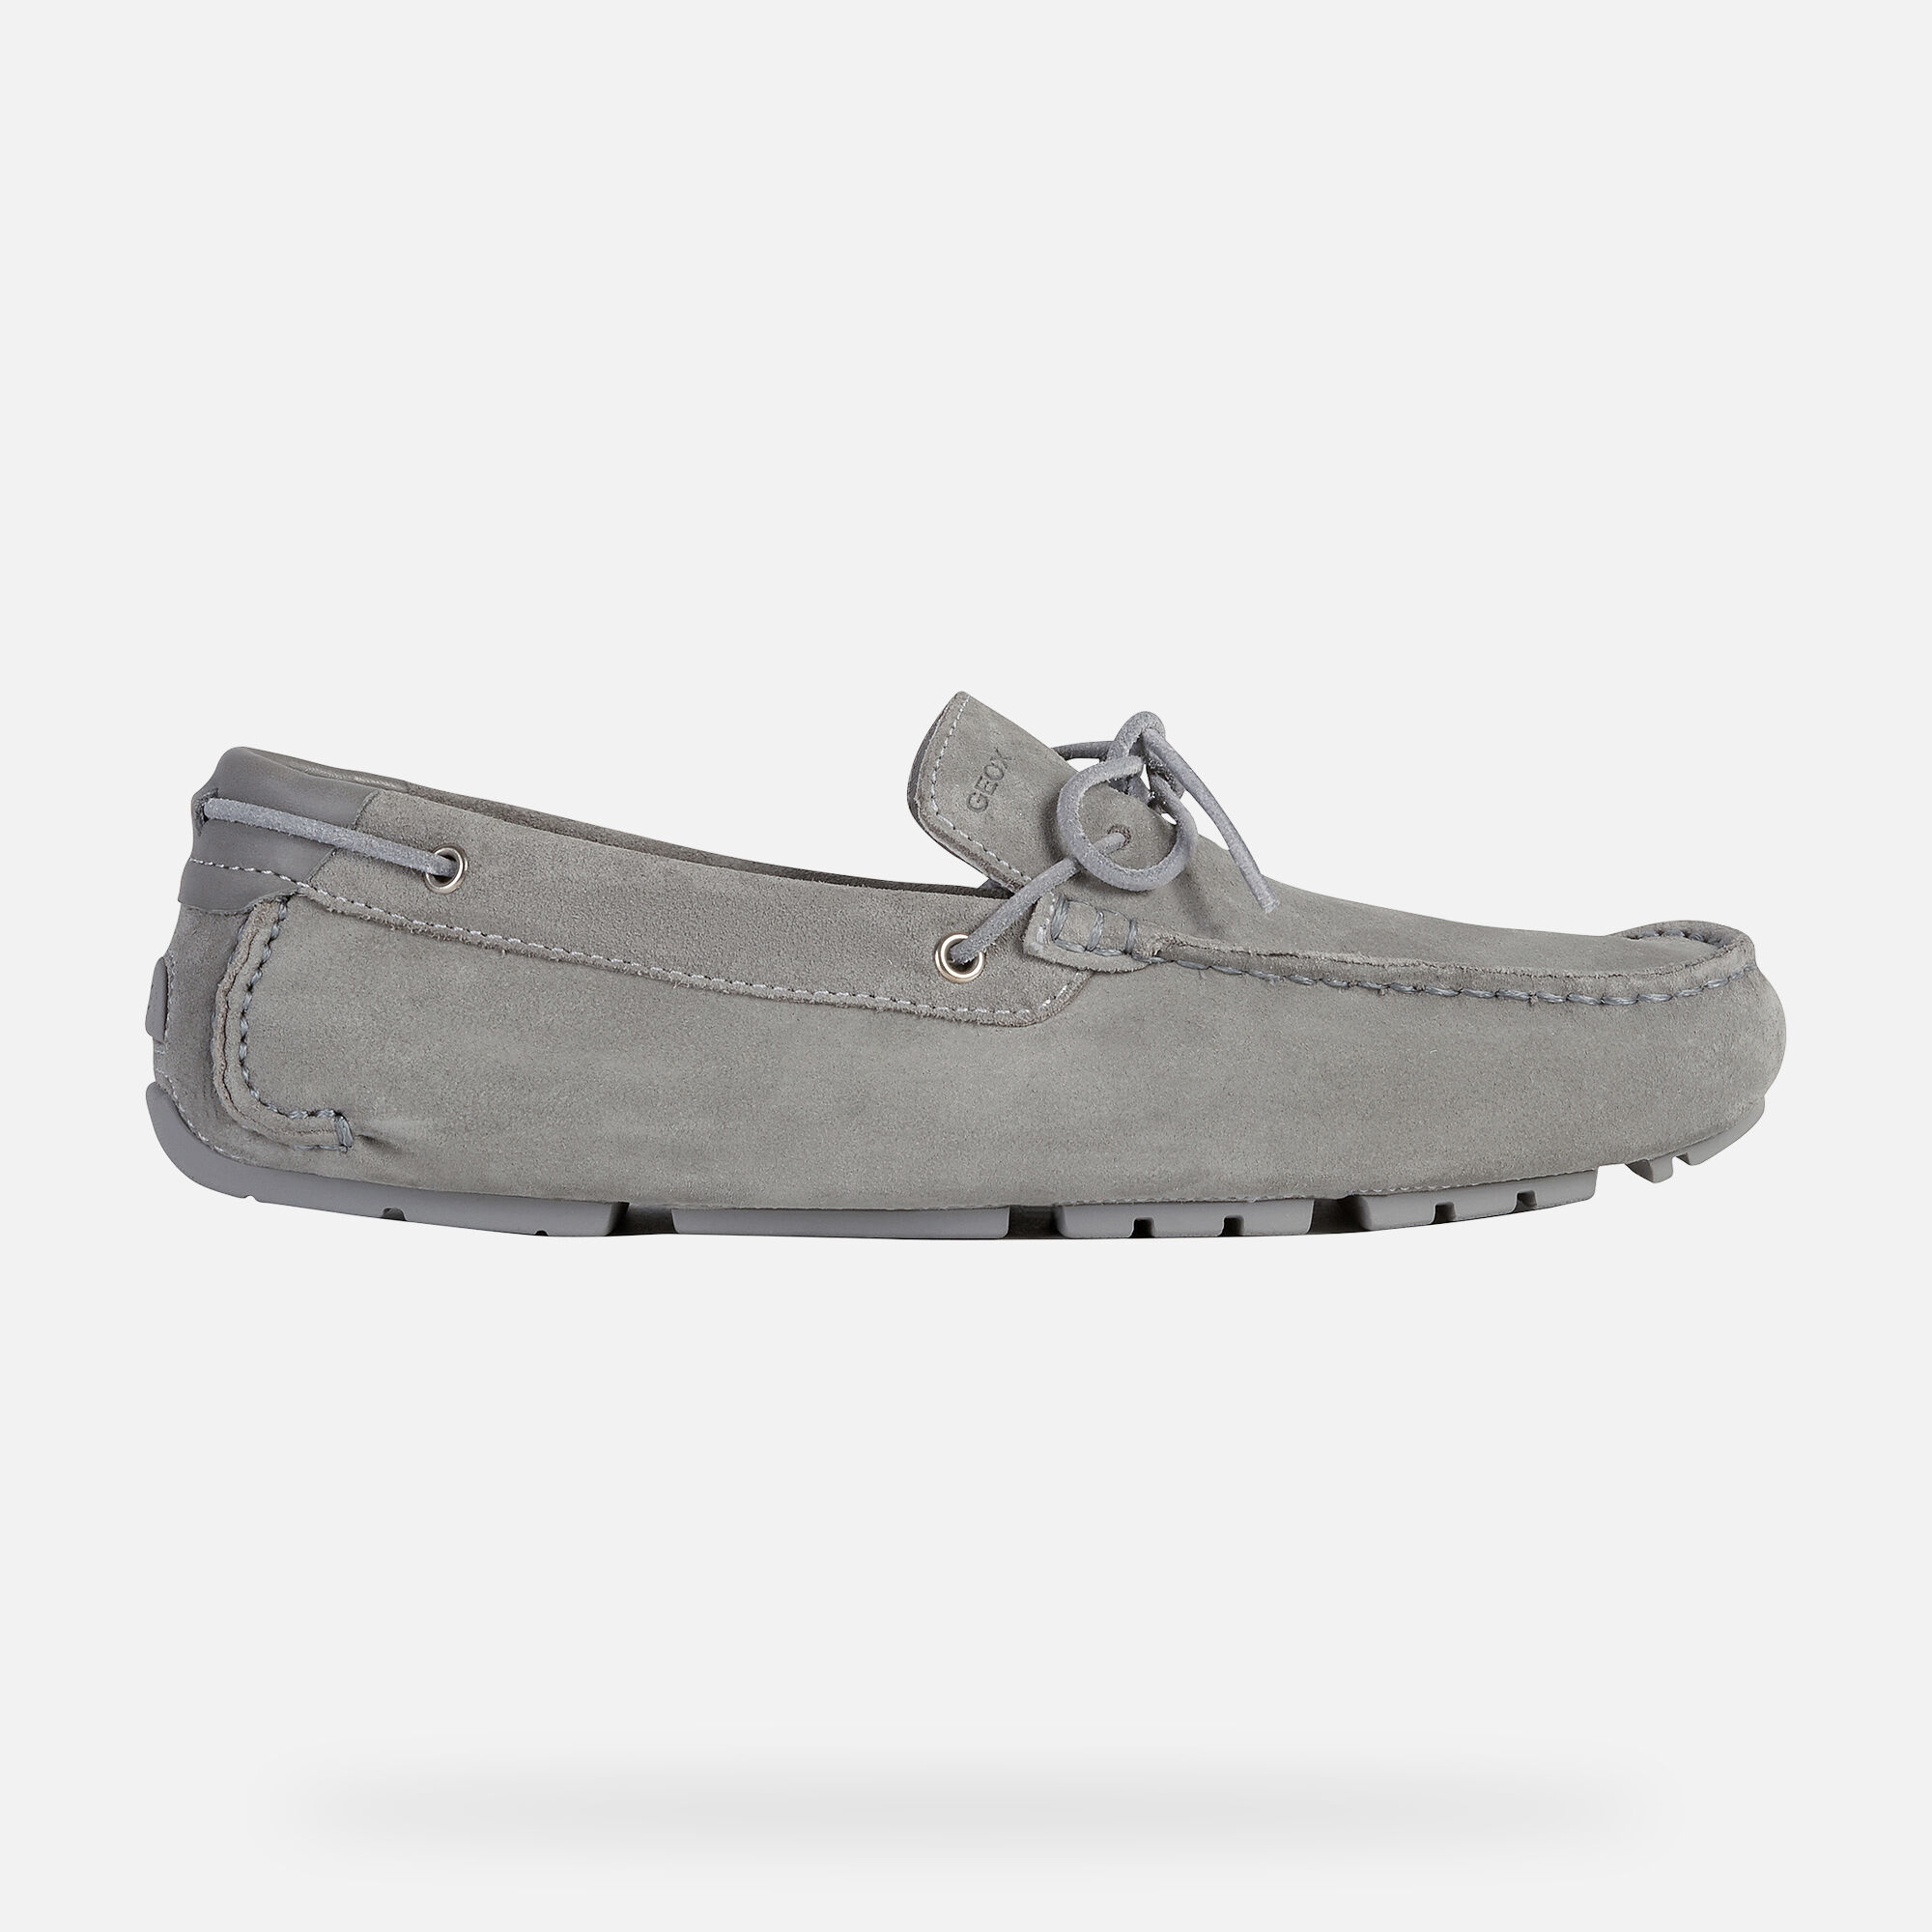 Geox MELBOURNE Man: Grey Loafers | Geox 